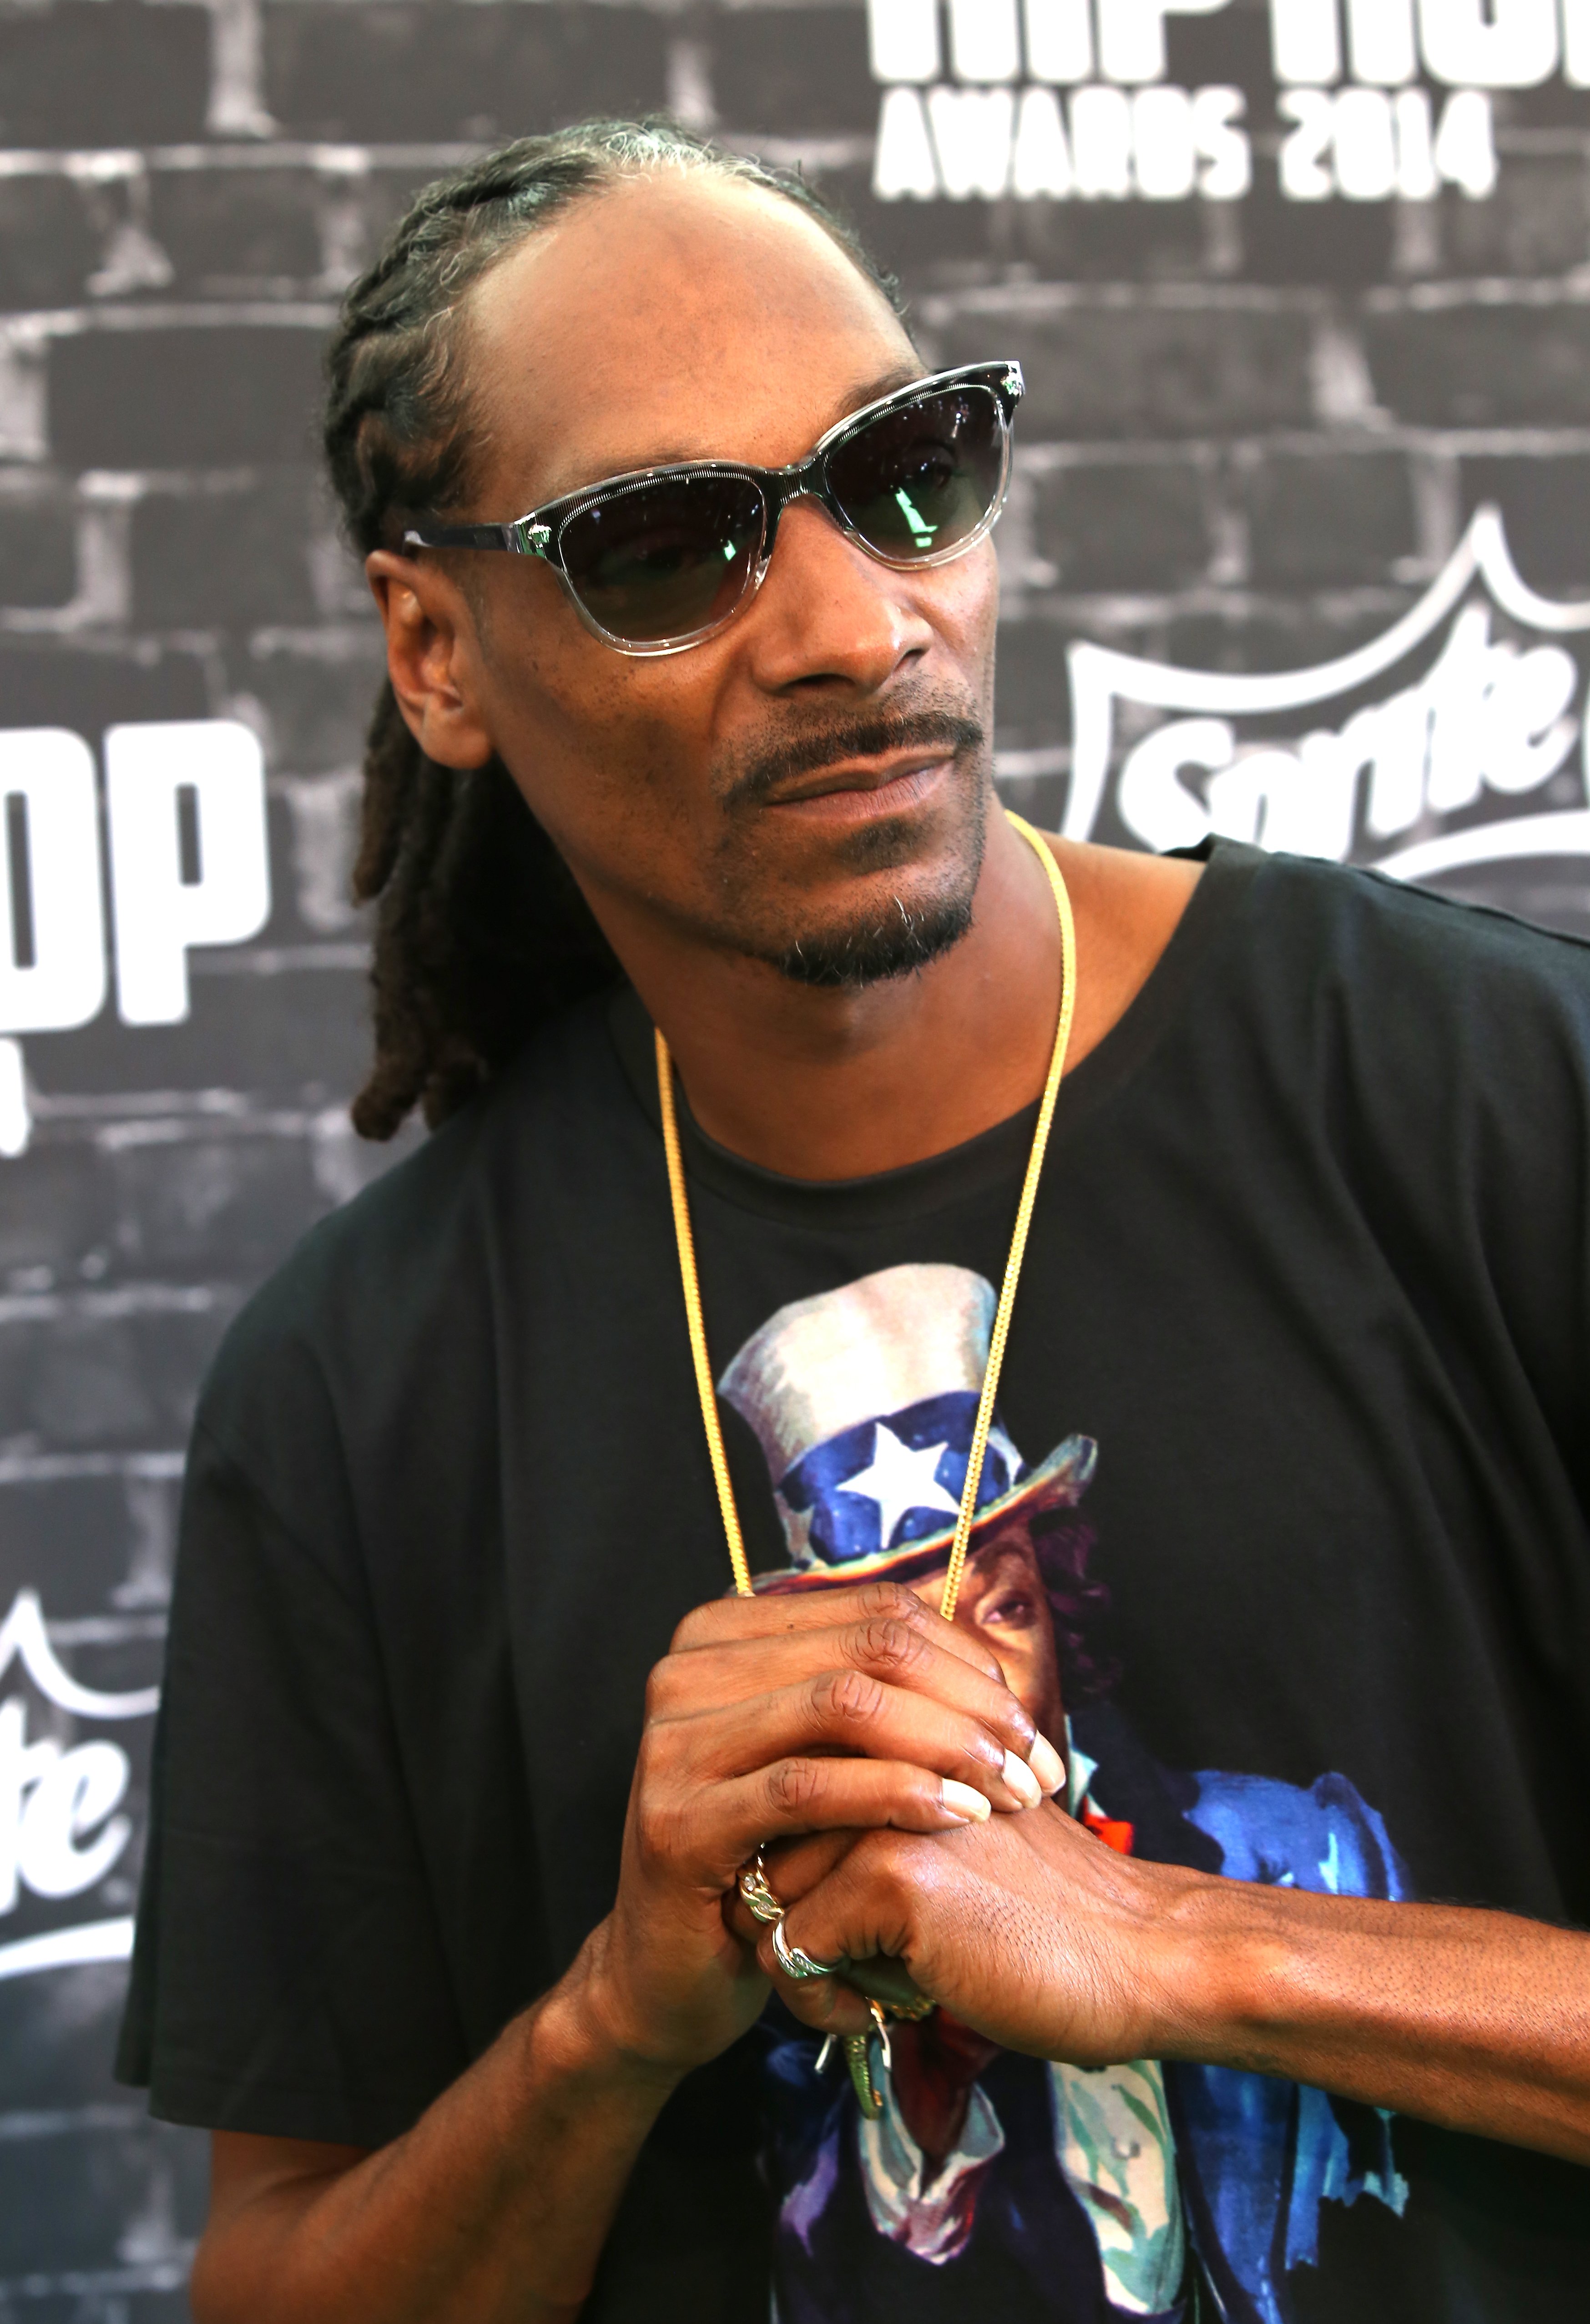 Snoop Dogg at the 2014 BET Hip Hop Awards red carpet. | Photo: Getty Images